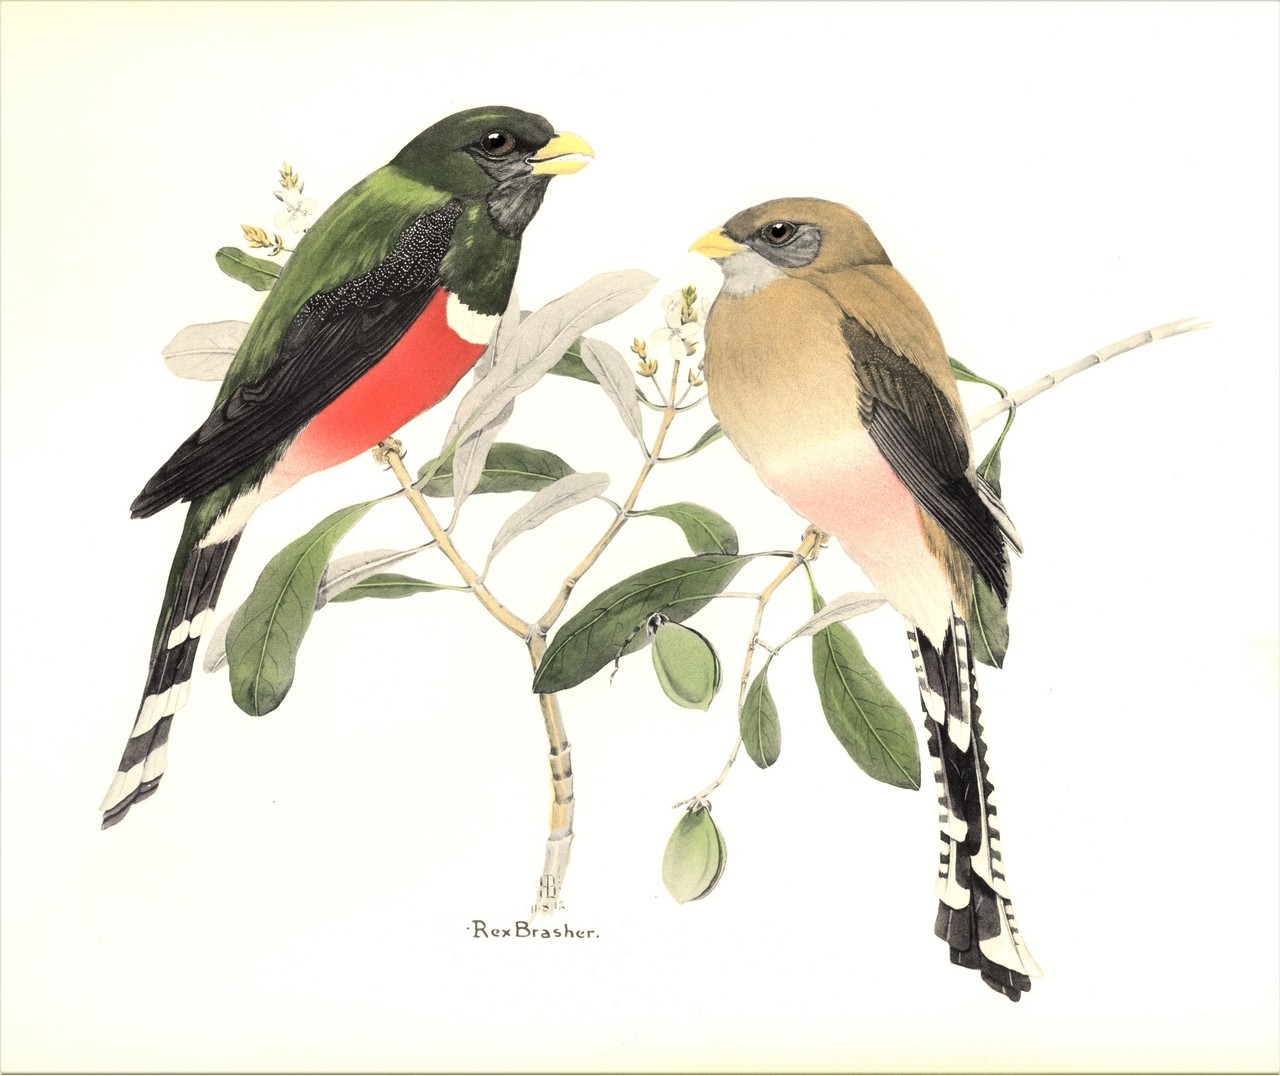 uwmspeccoll:
“ Feathursday Name That Bird After being snowbound in Milwaukee for a few weeks, the mind inevitably turns to the tropics. Hence, our choice for this week’s #Feathursday Name That Bird puzzler. This colorful couple spend most of their...